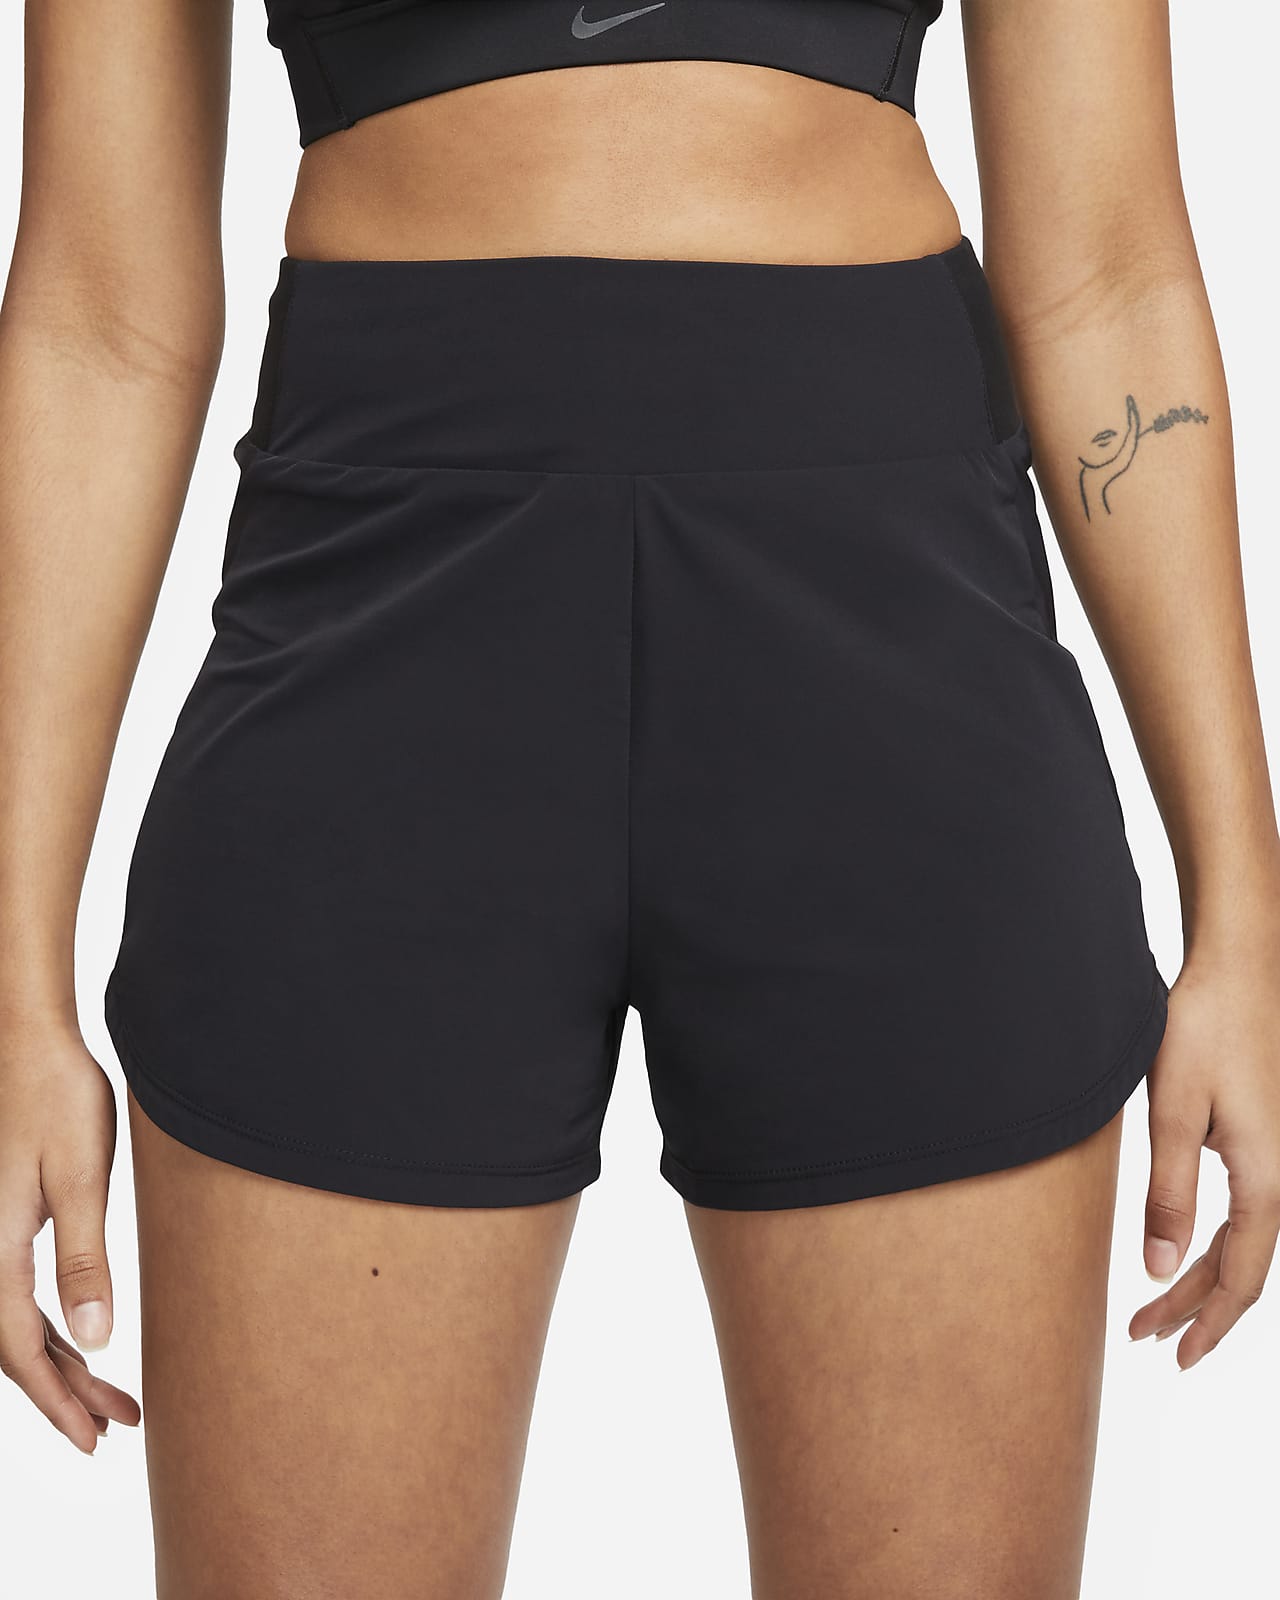 Nike Bliss Women\'s High-Waisted Dri-FIT Shorts. Brief-Lined 3\